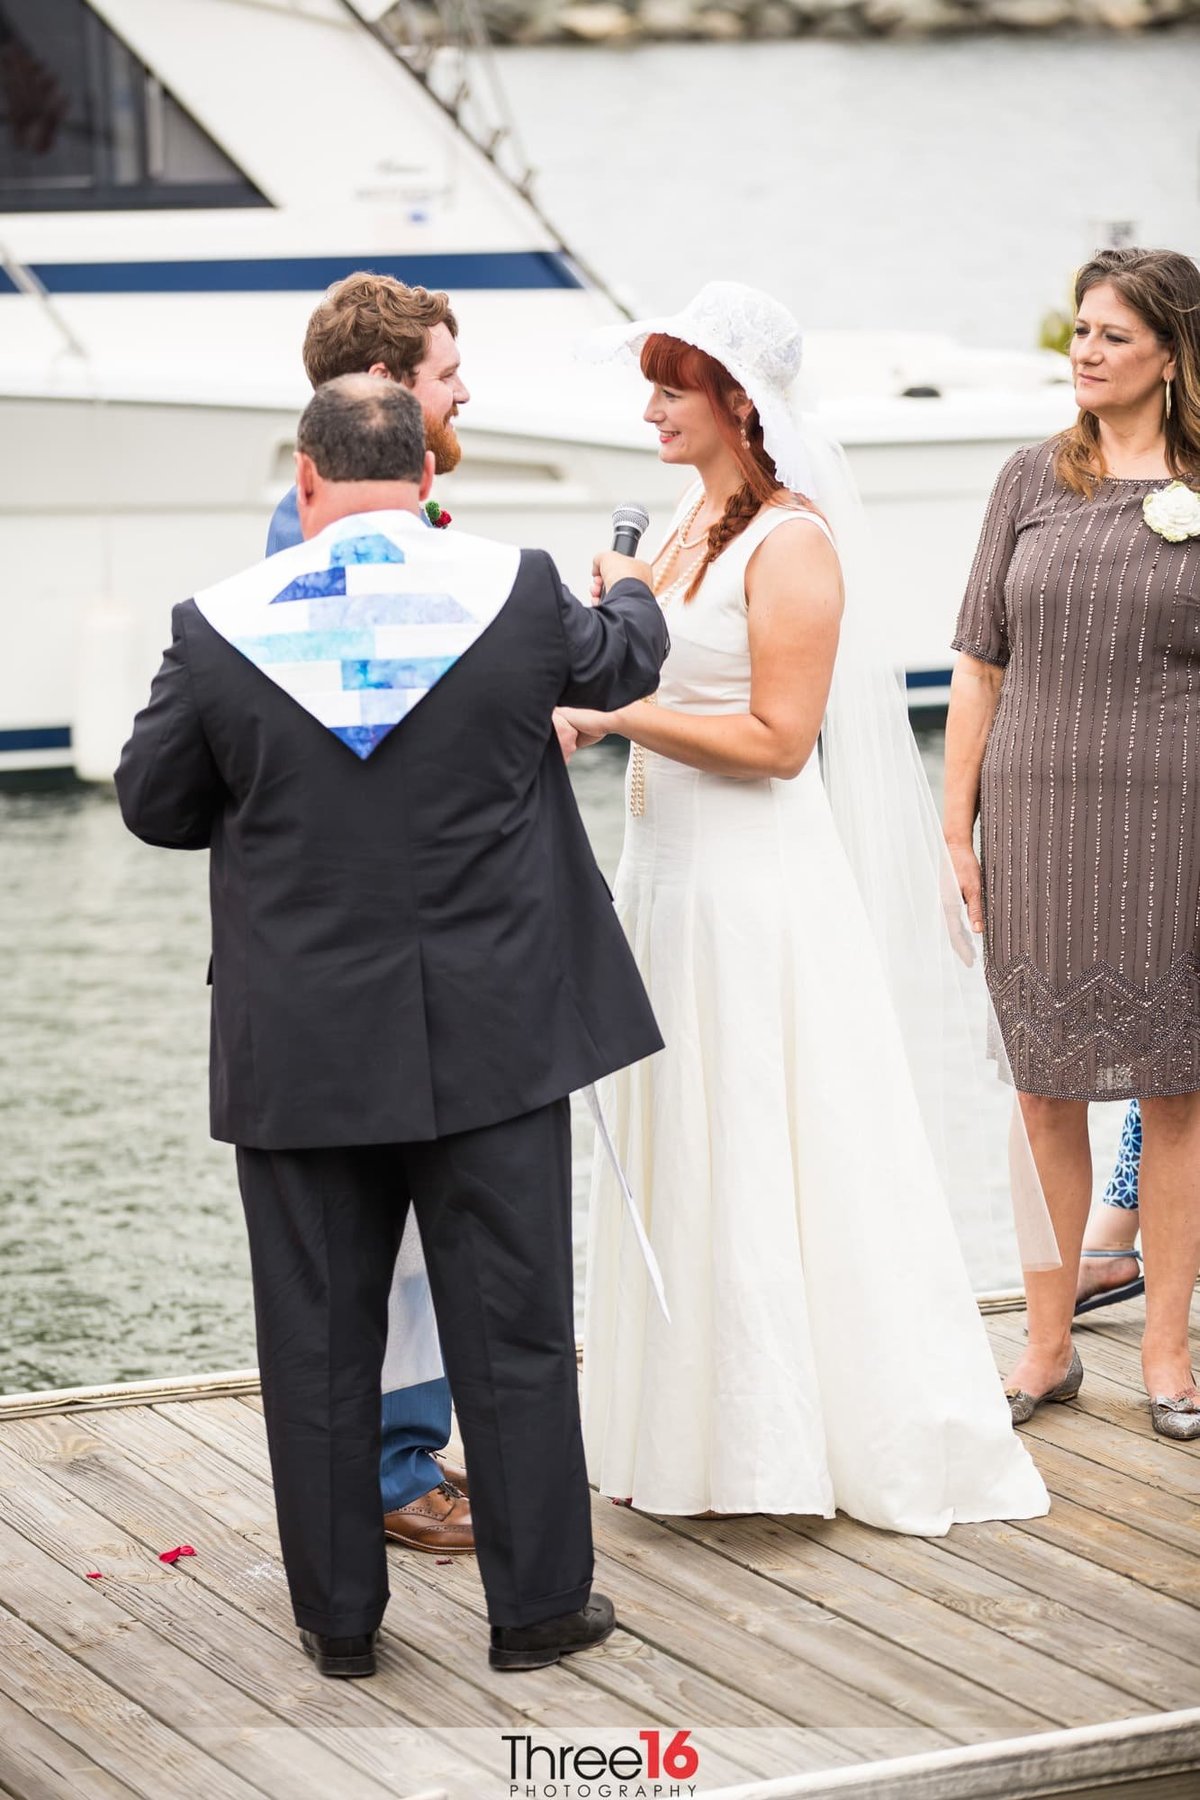 Wedding Ceremony on the dock at the Dana Point Yacht Club